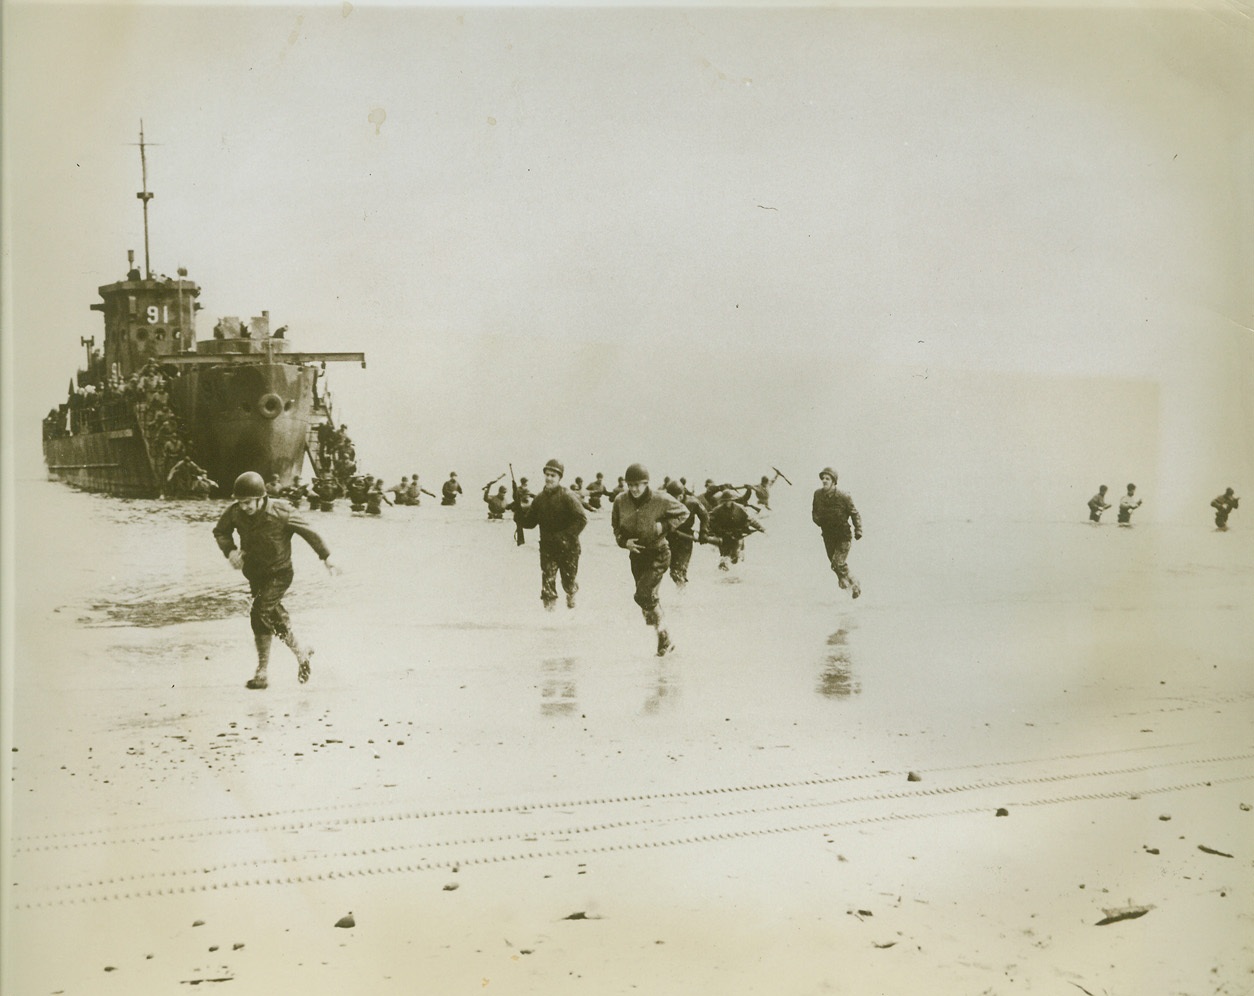 Training For Invasion By Sea, 6/17/1943. SOMEWHERE ALONG THE ATLANTIC COAST  - Streaming into waist-deep waters from an L.C.I. (Landing Craft: Infantry), U.S. Army troops "hit the beach" during practice invasion maneuvers along the Atlantic Coast. Training to strike as a strong, well-drilled invasion spearhead, these men will form part of a unified Army-Navy amphibious force to storm enemy strongholds from the sea.;